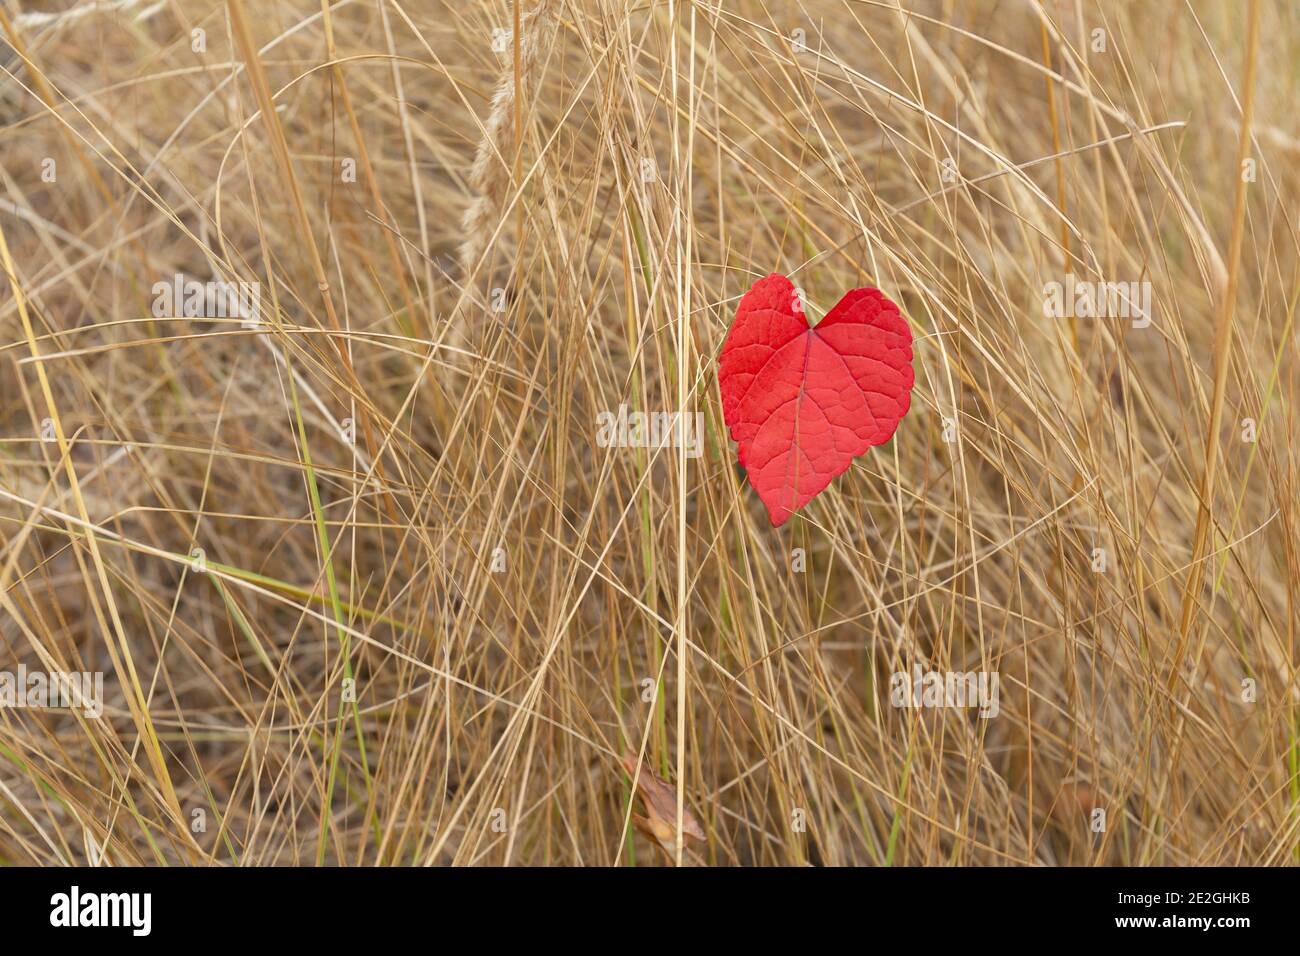 Red heart shape autumn leaf in tall dry grass Stock Photo